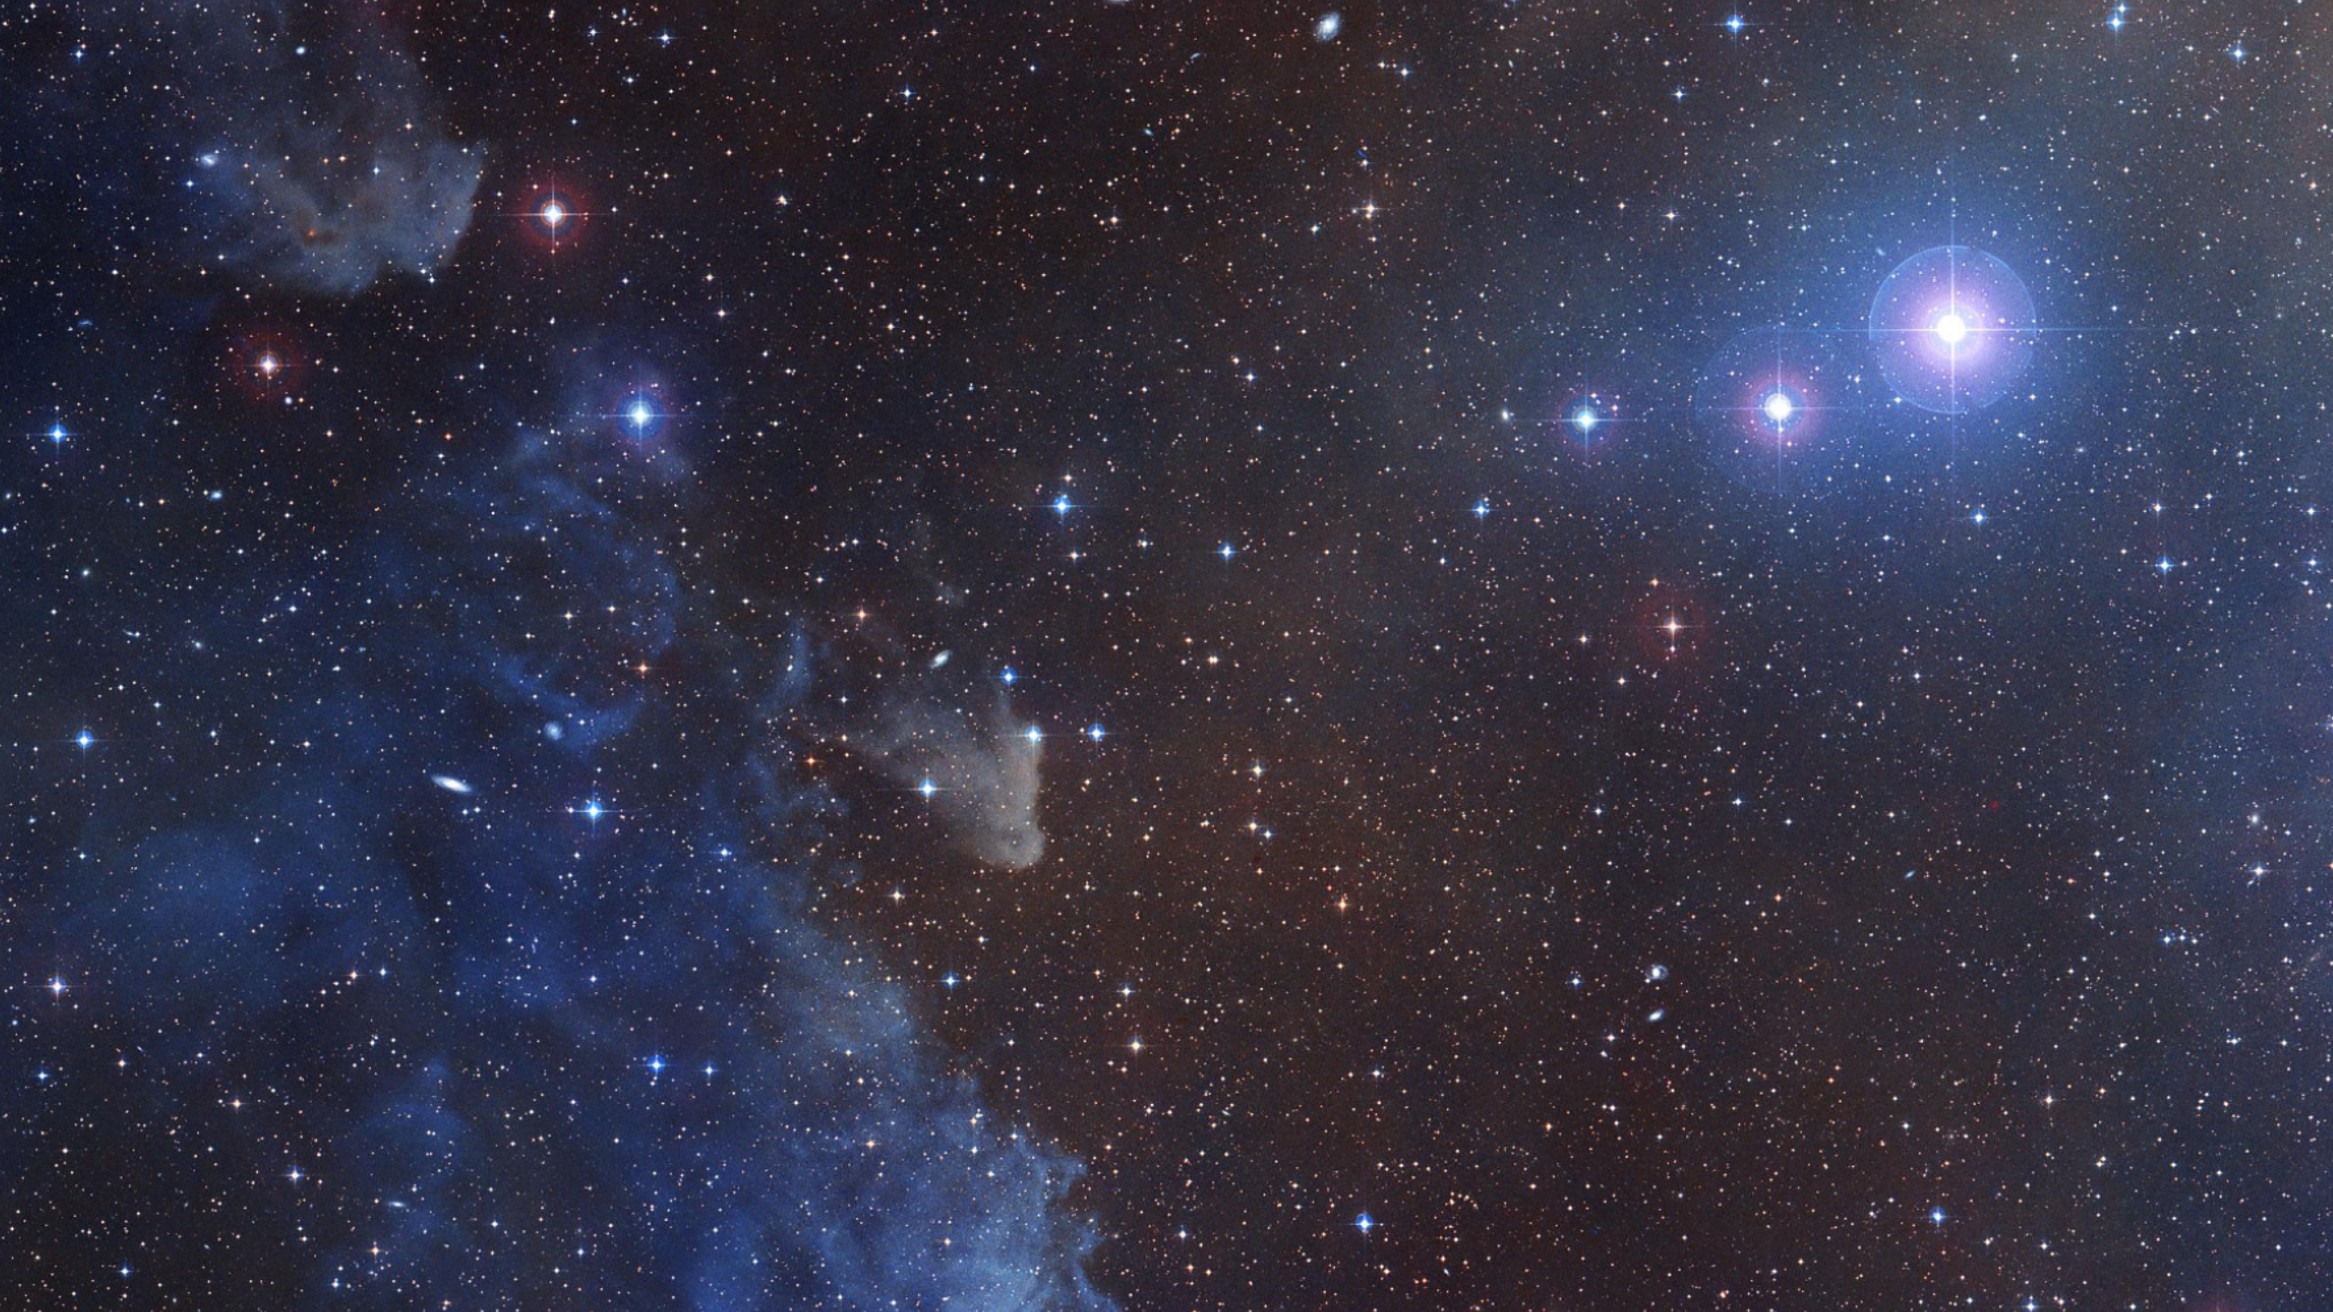 The bright blue star Rigel next to the cosmic clouds of the Witch Head Nebula